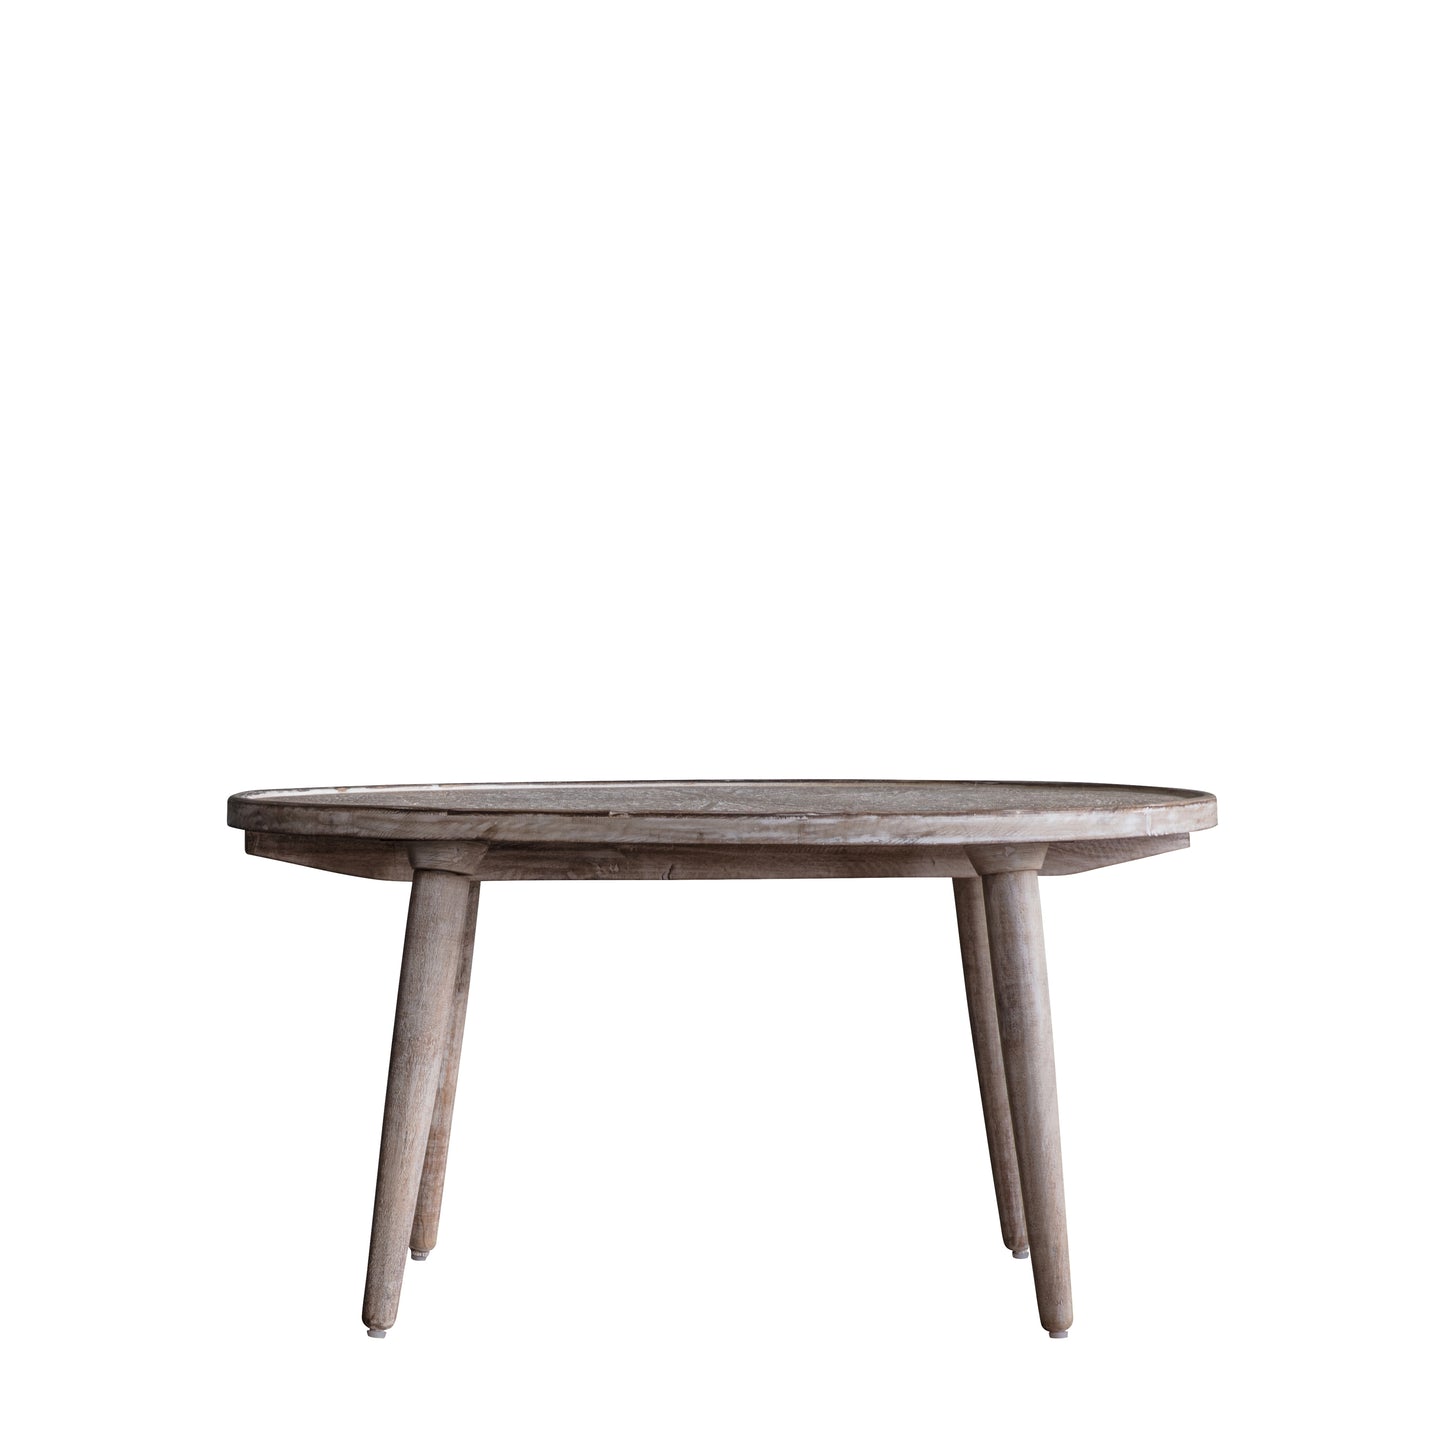 A Bantham Coffee Table Natural White 910x910x460mm with wooden top and legs for home furniture and interior decor.